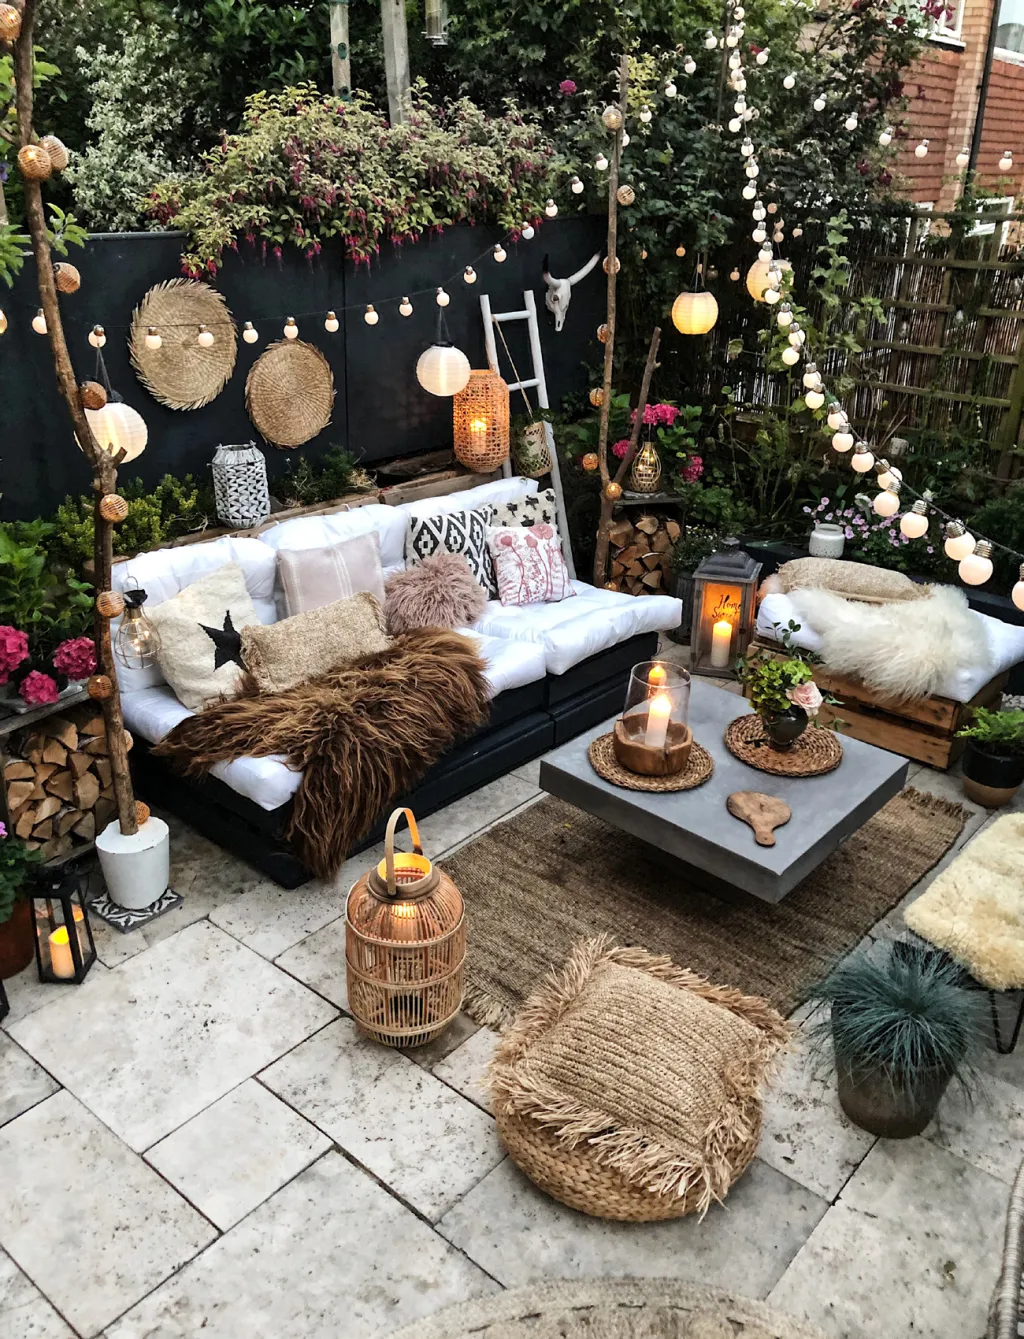 Boho style home decor outdoor ideas help relax and laidback entertaining